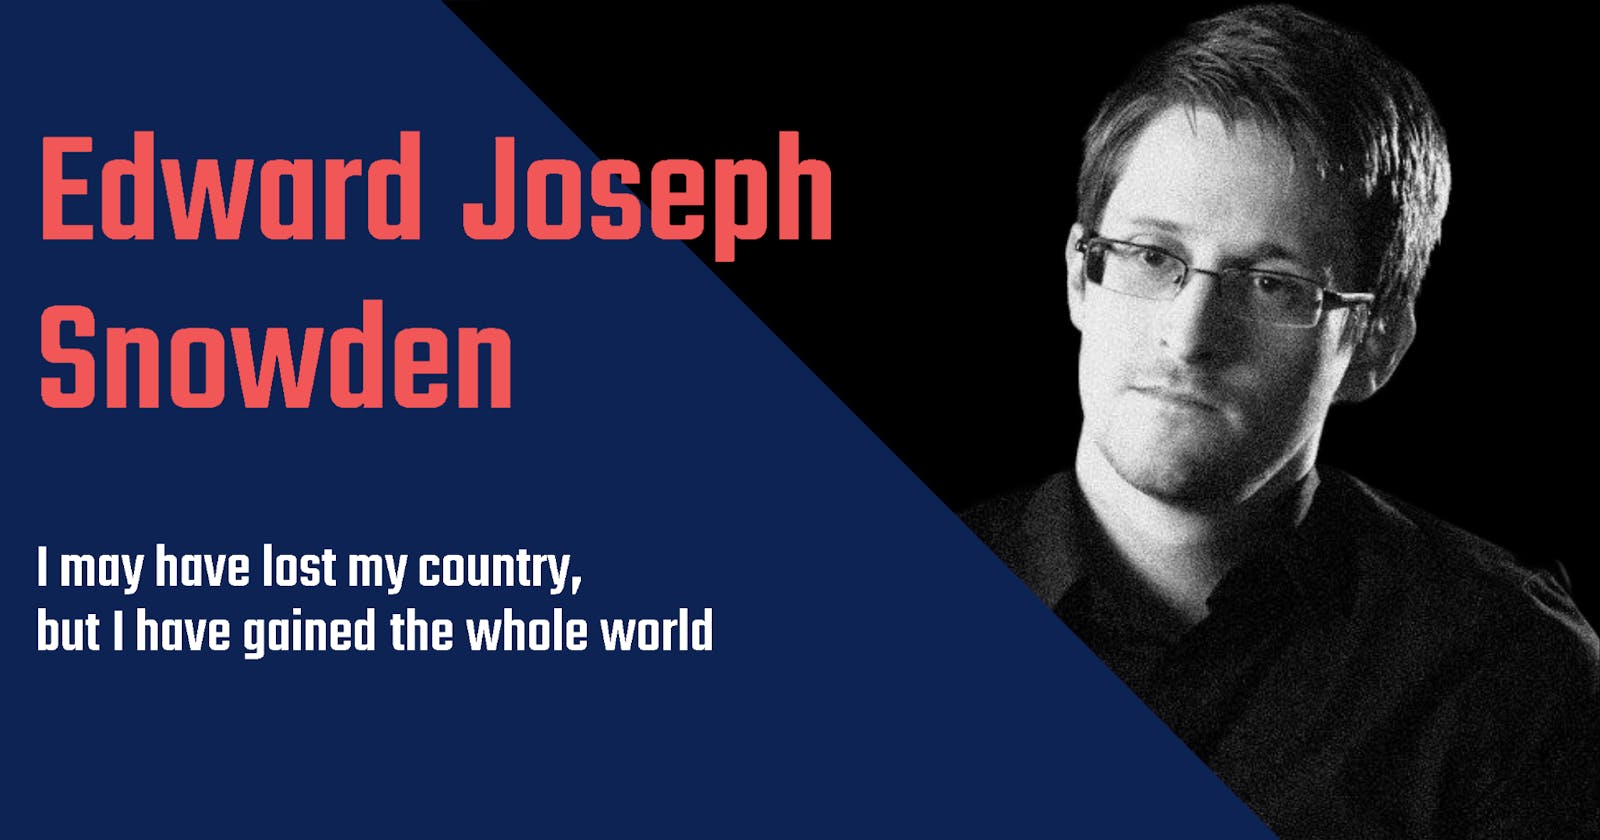 Edward Joseph Snowden: The Whistleblower Who Revealed the Truth About Surveillance